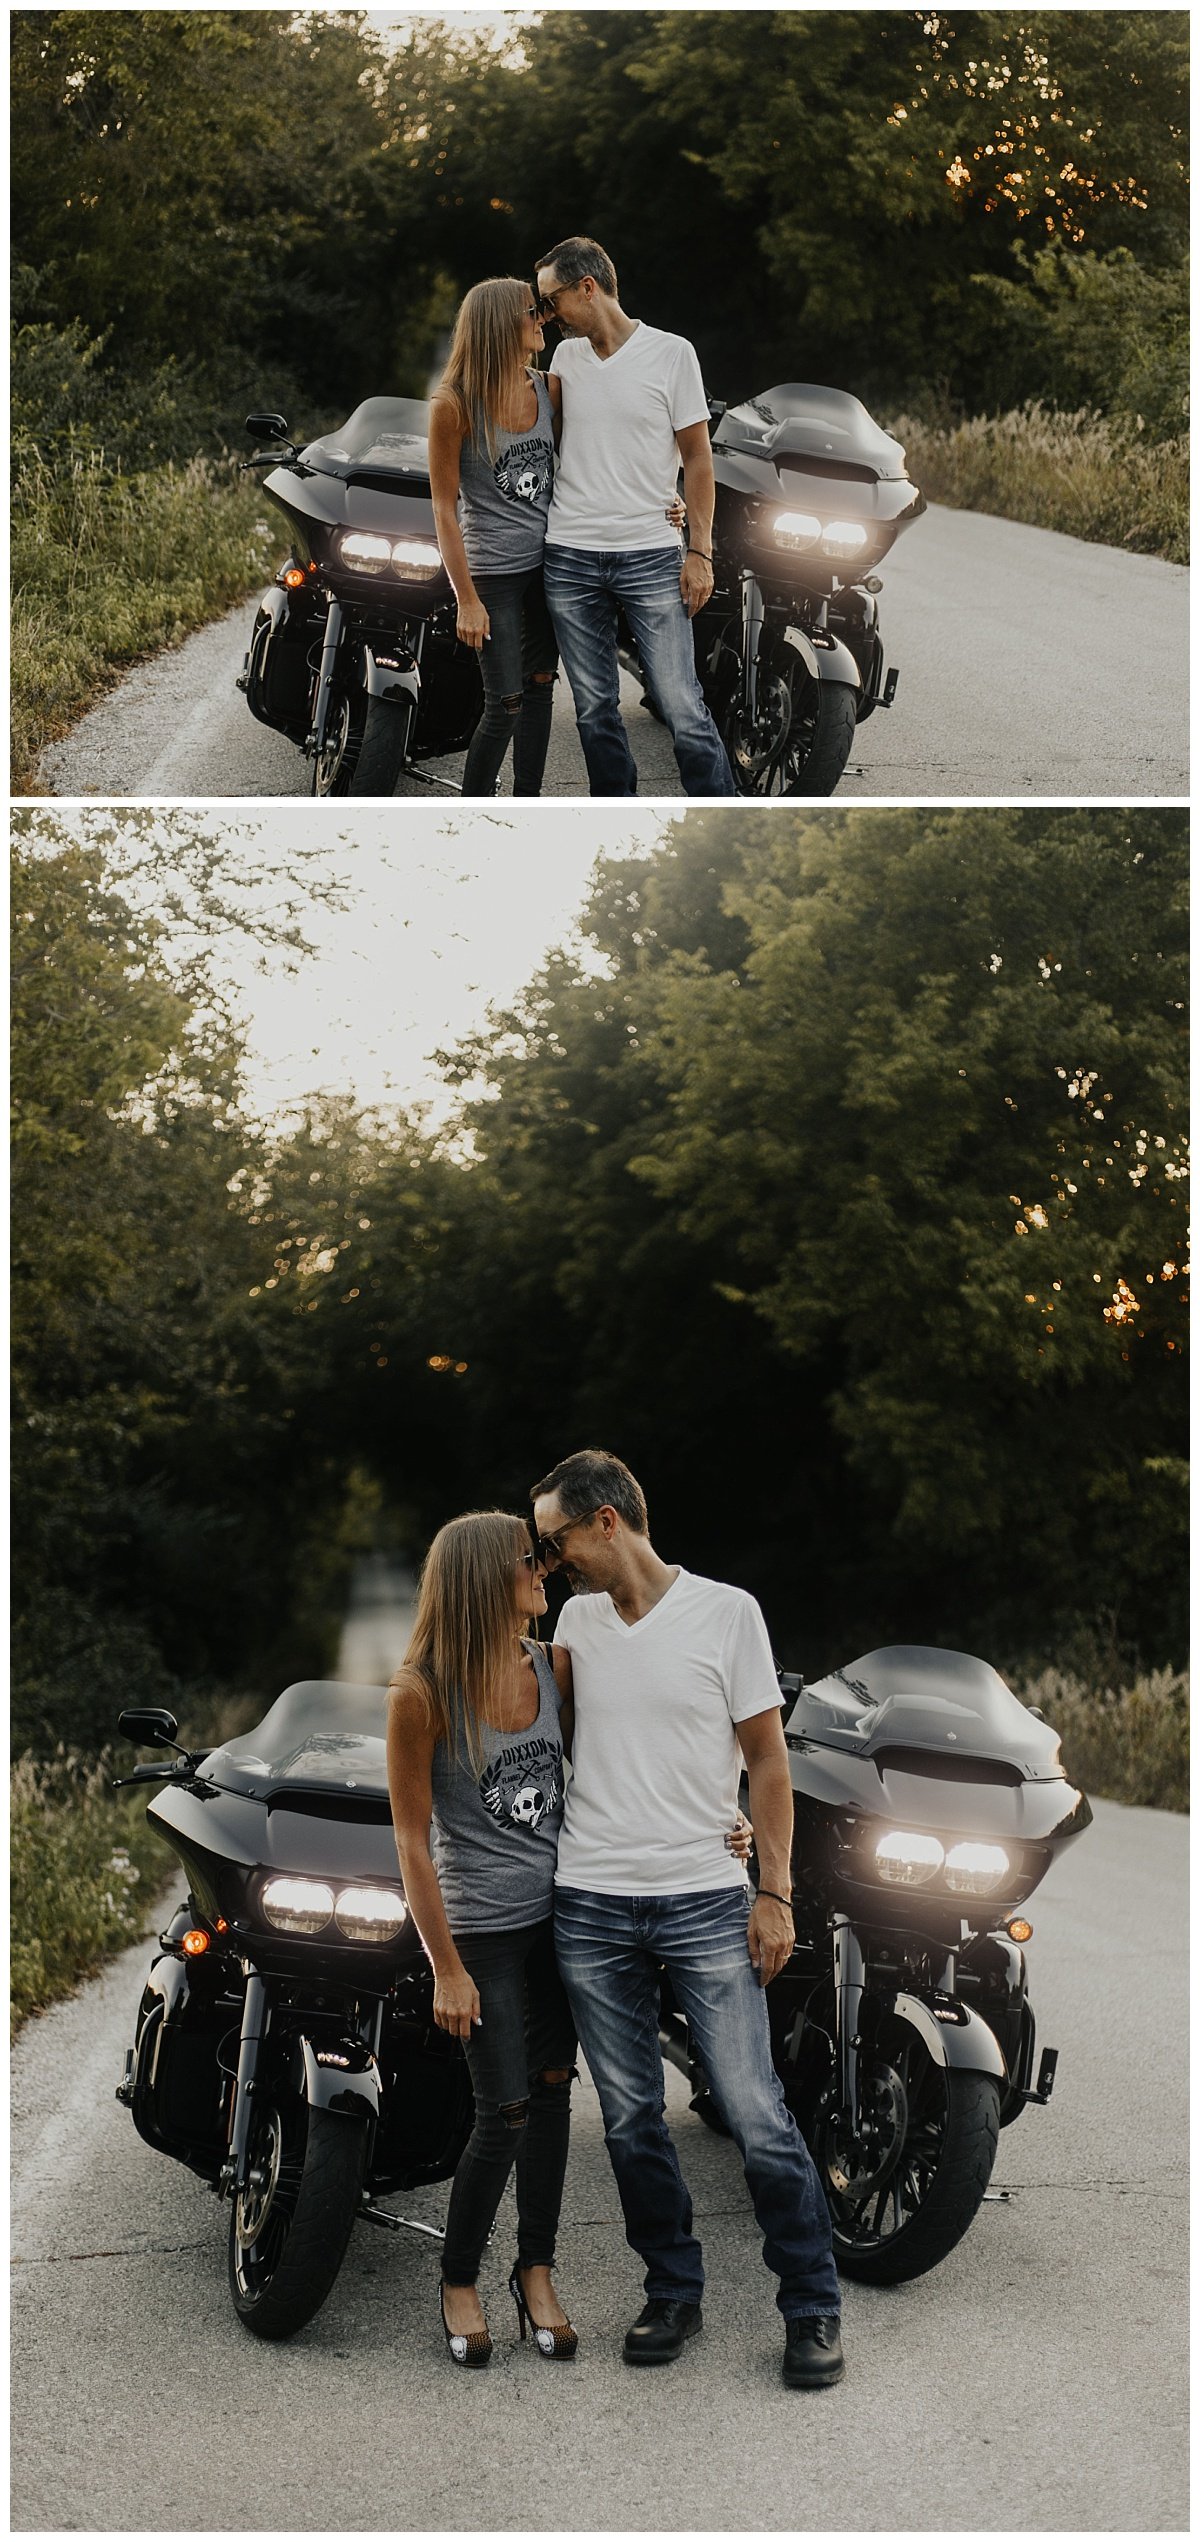 motorcycle+session+_+adventure+session+_+engagement+session+_+motorcycle+photos+_+lana+del+rey+_+ride+or+die+_+adventurous+couple+_+kansas+city+photographer+_+kansas+city+photography (1).jpeg